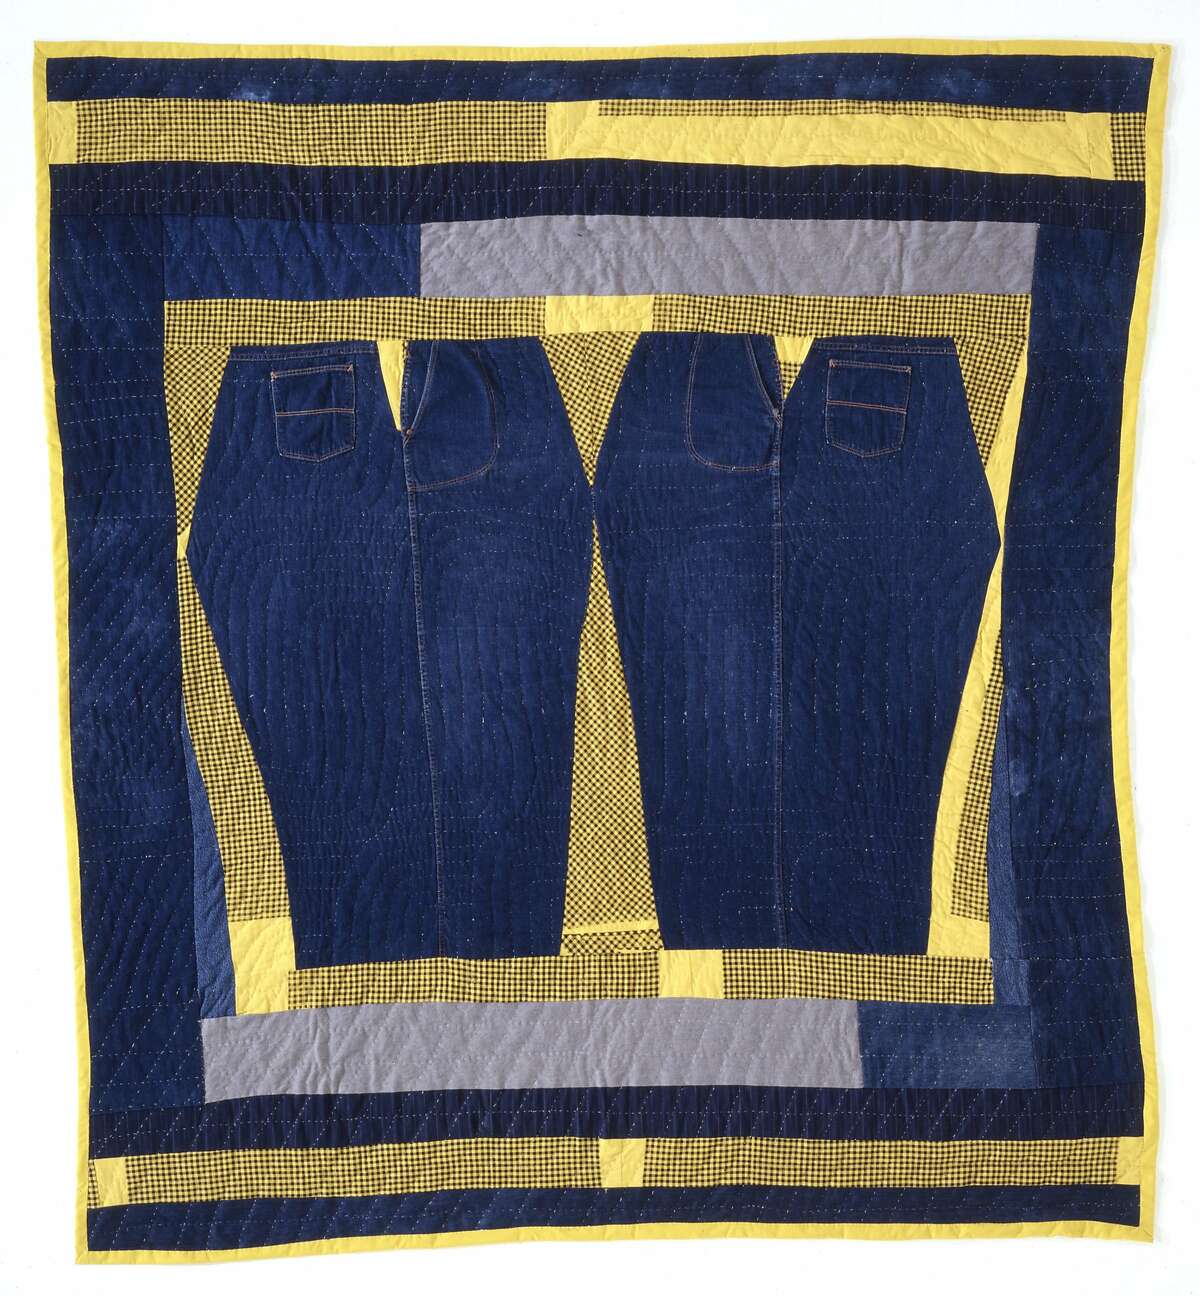 Discarded denim was pieced by Arbie Williams into "Mamaloo," which was also quilted by Willia Ette Graham and Johnnie Alberta Wade. The 1992 denim and cotton flannel quilt from the collection of Eli Leon appears in "Yo-Yos & Half Squares: Contemporary California Quilts" at Oakland Museum of California from Sept. 12-Feb. 21. Credit: Oakland Museum of Caifornia